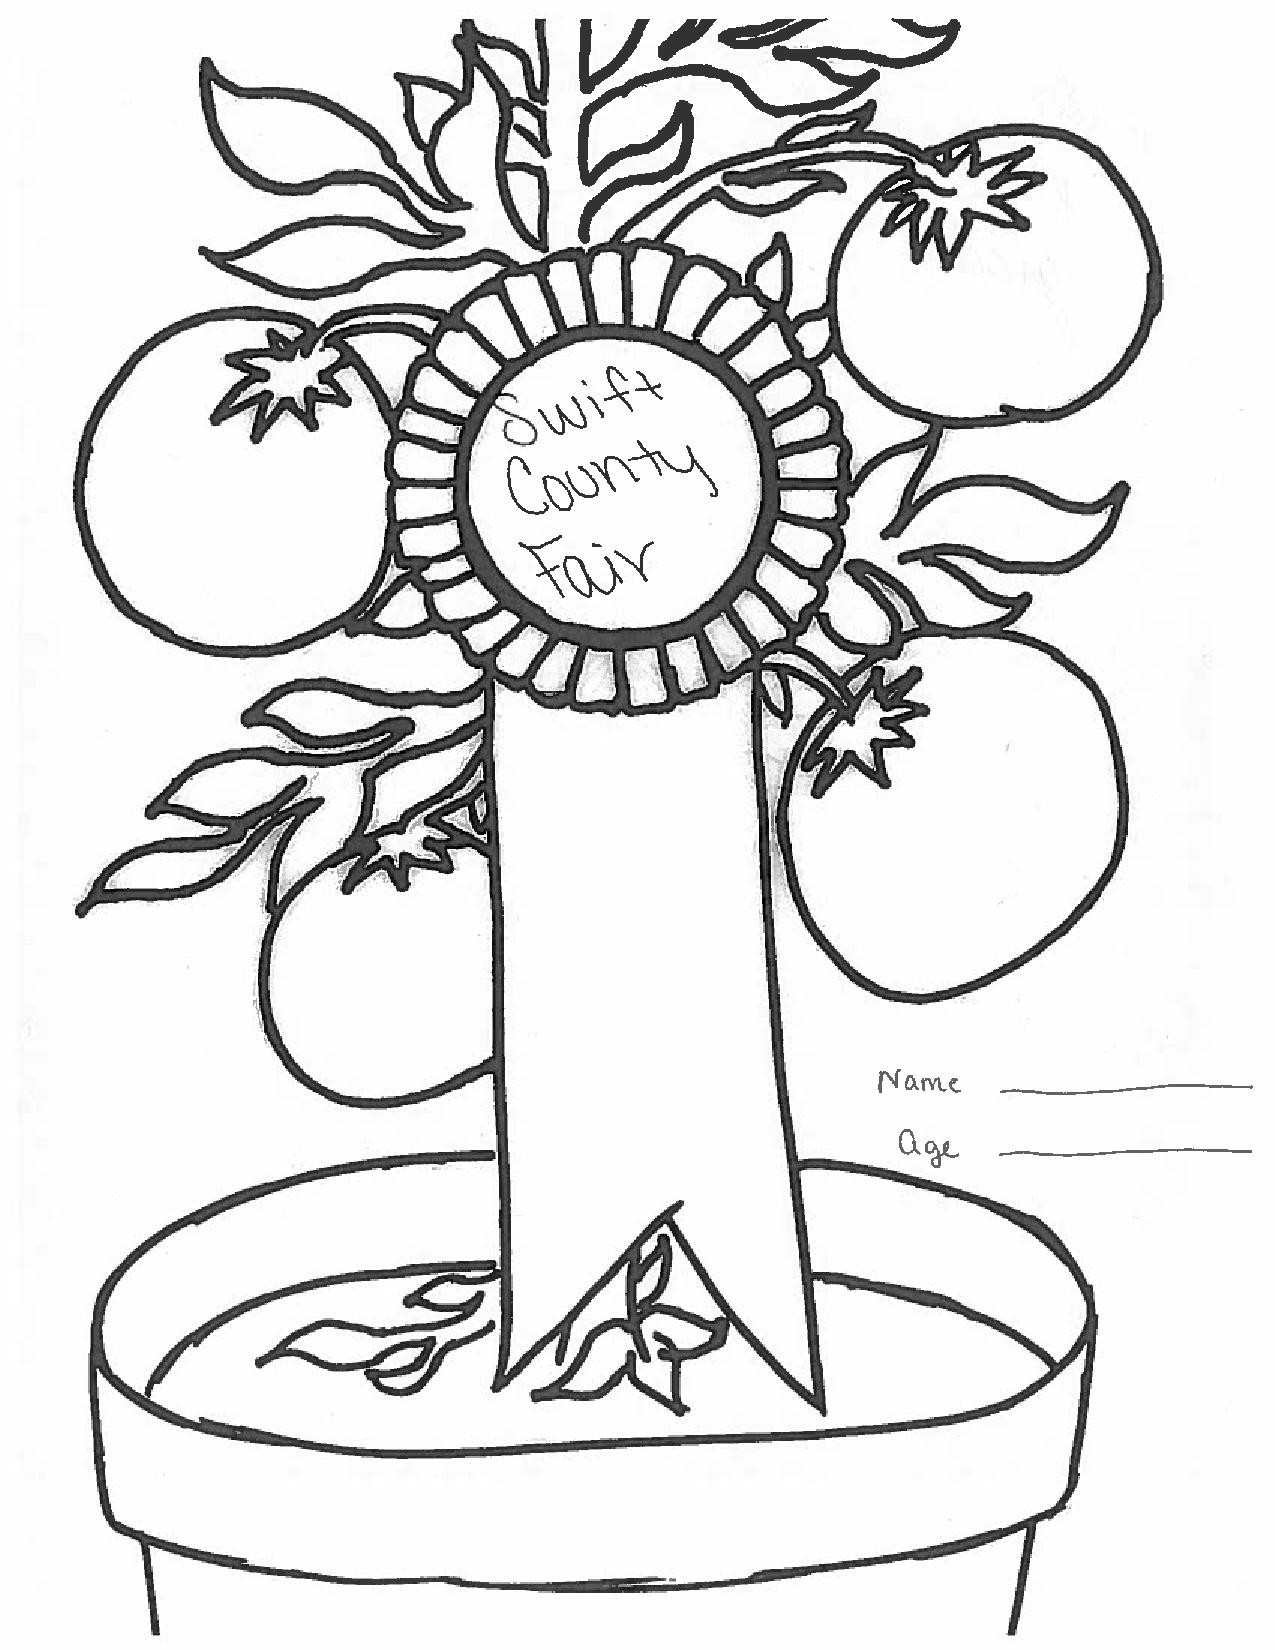 Kids Coloring Contest
 Kids Coloring Contest 2020 Swift County Fair